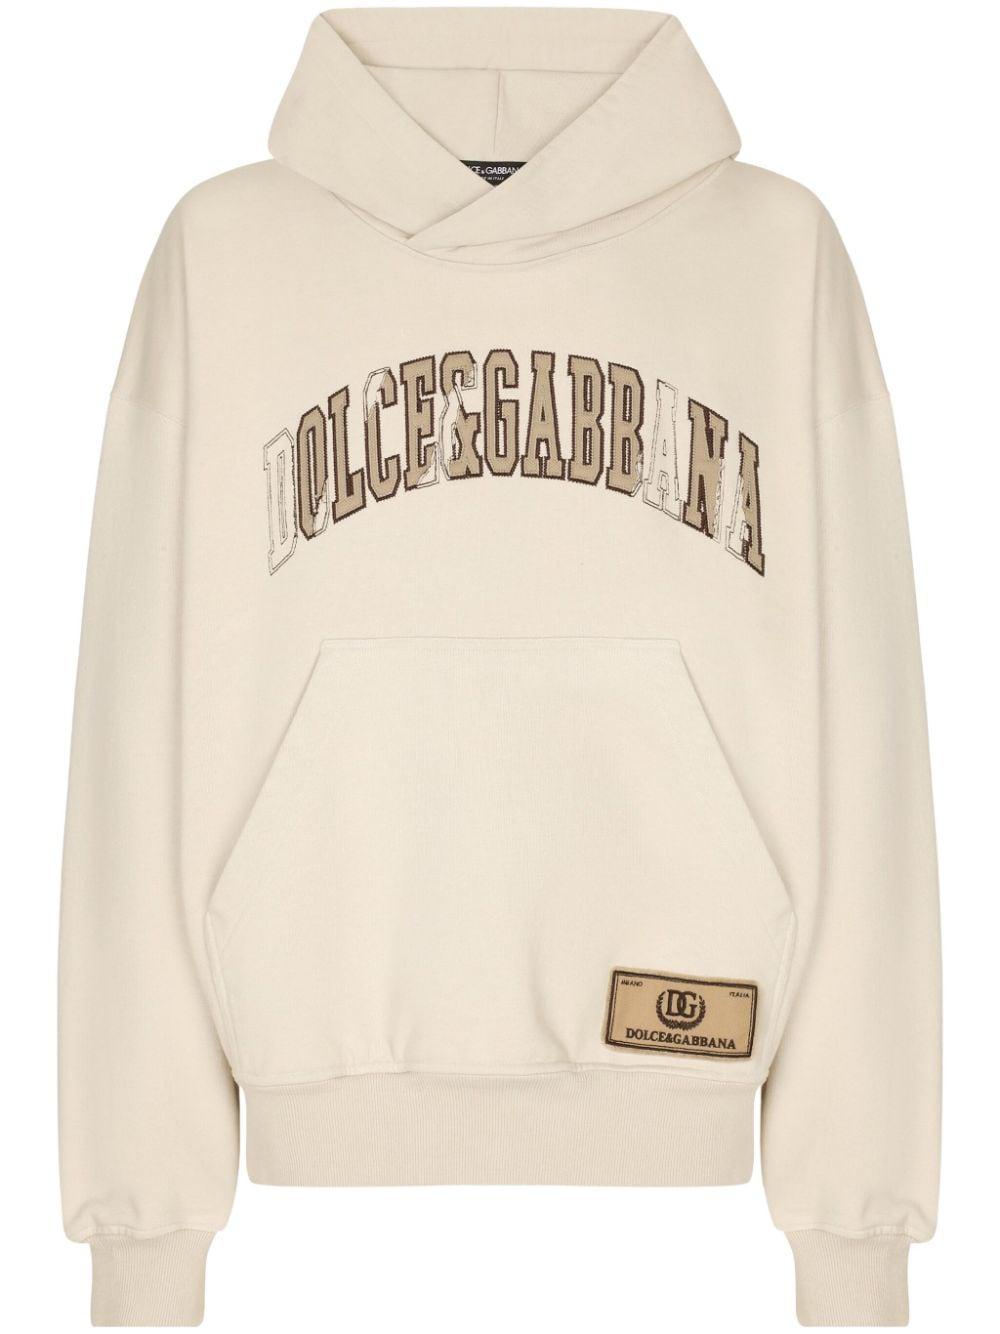 DOLCE & GABBANA HOODED SWEATSHIRT WITH EMBROIDERED LOGO